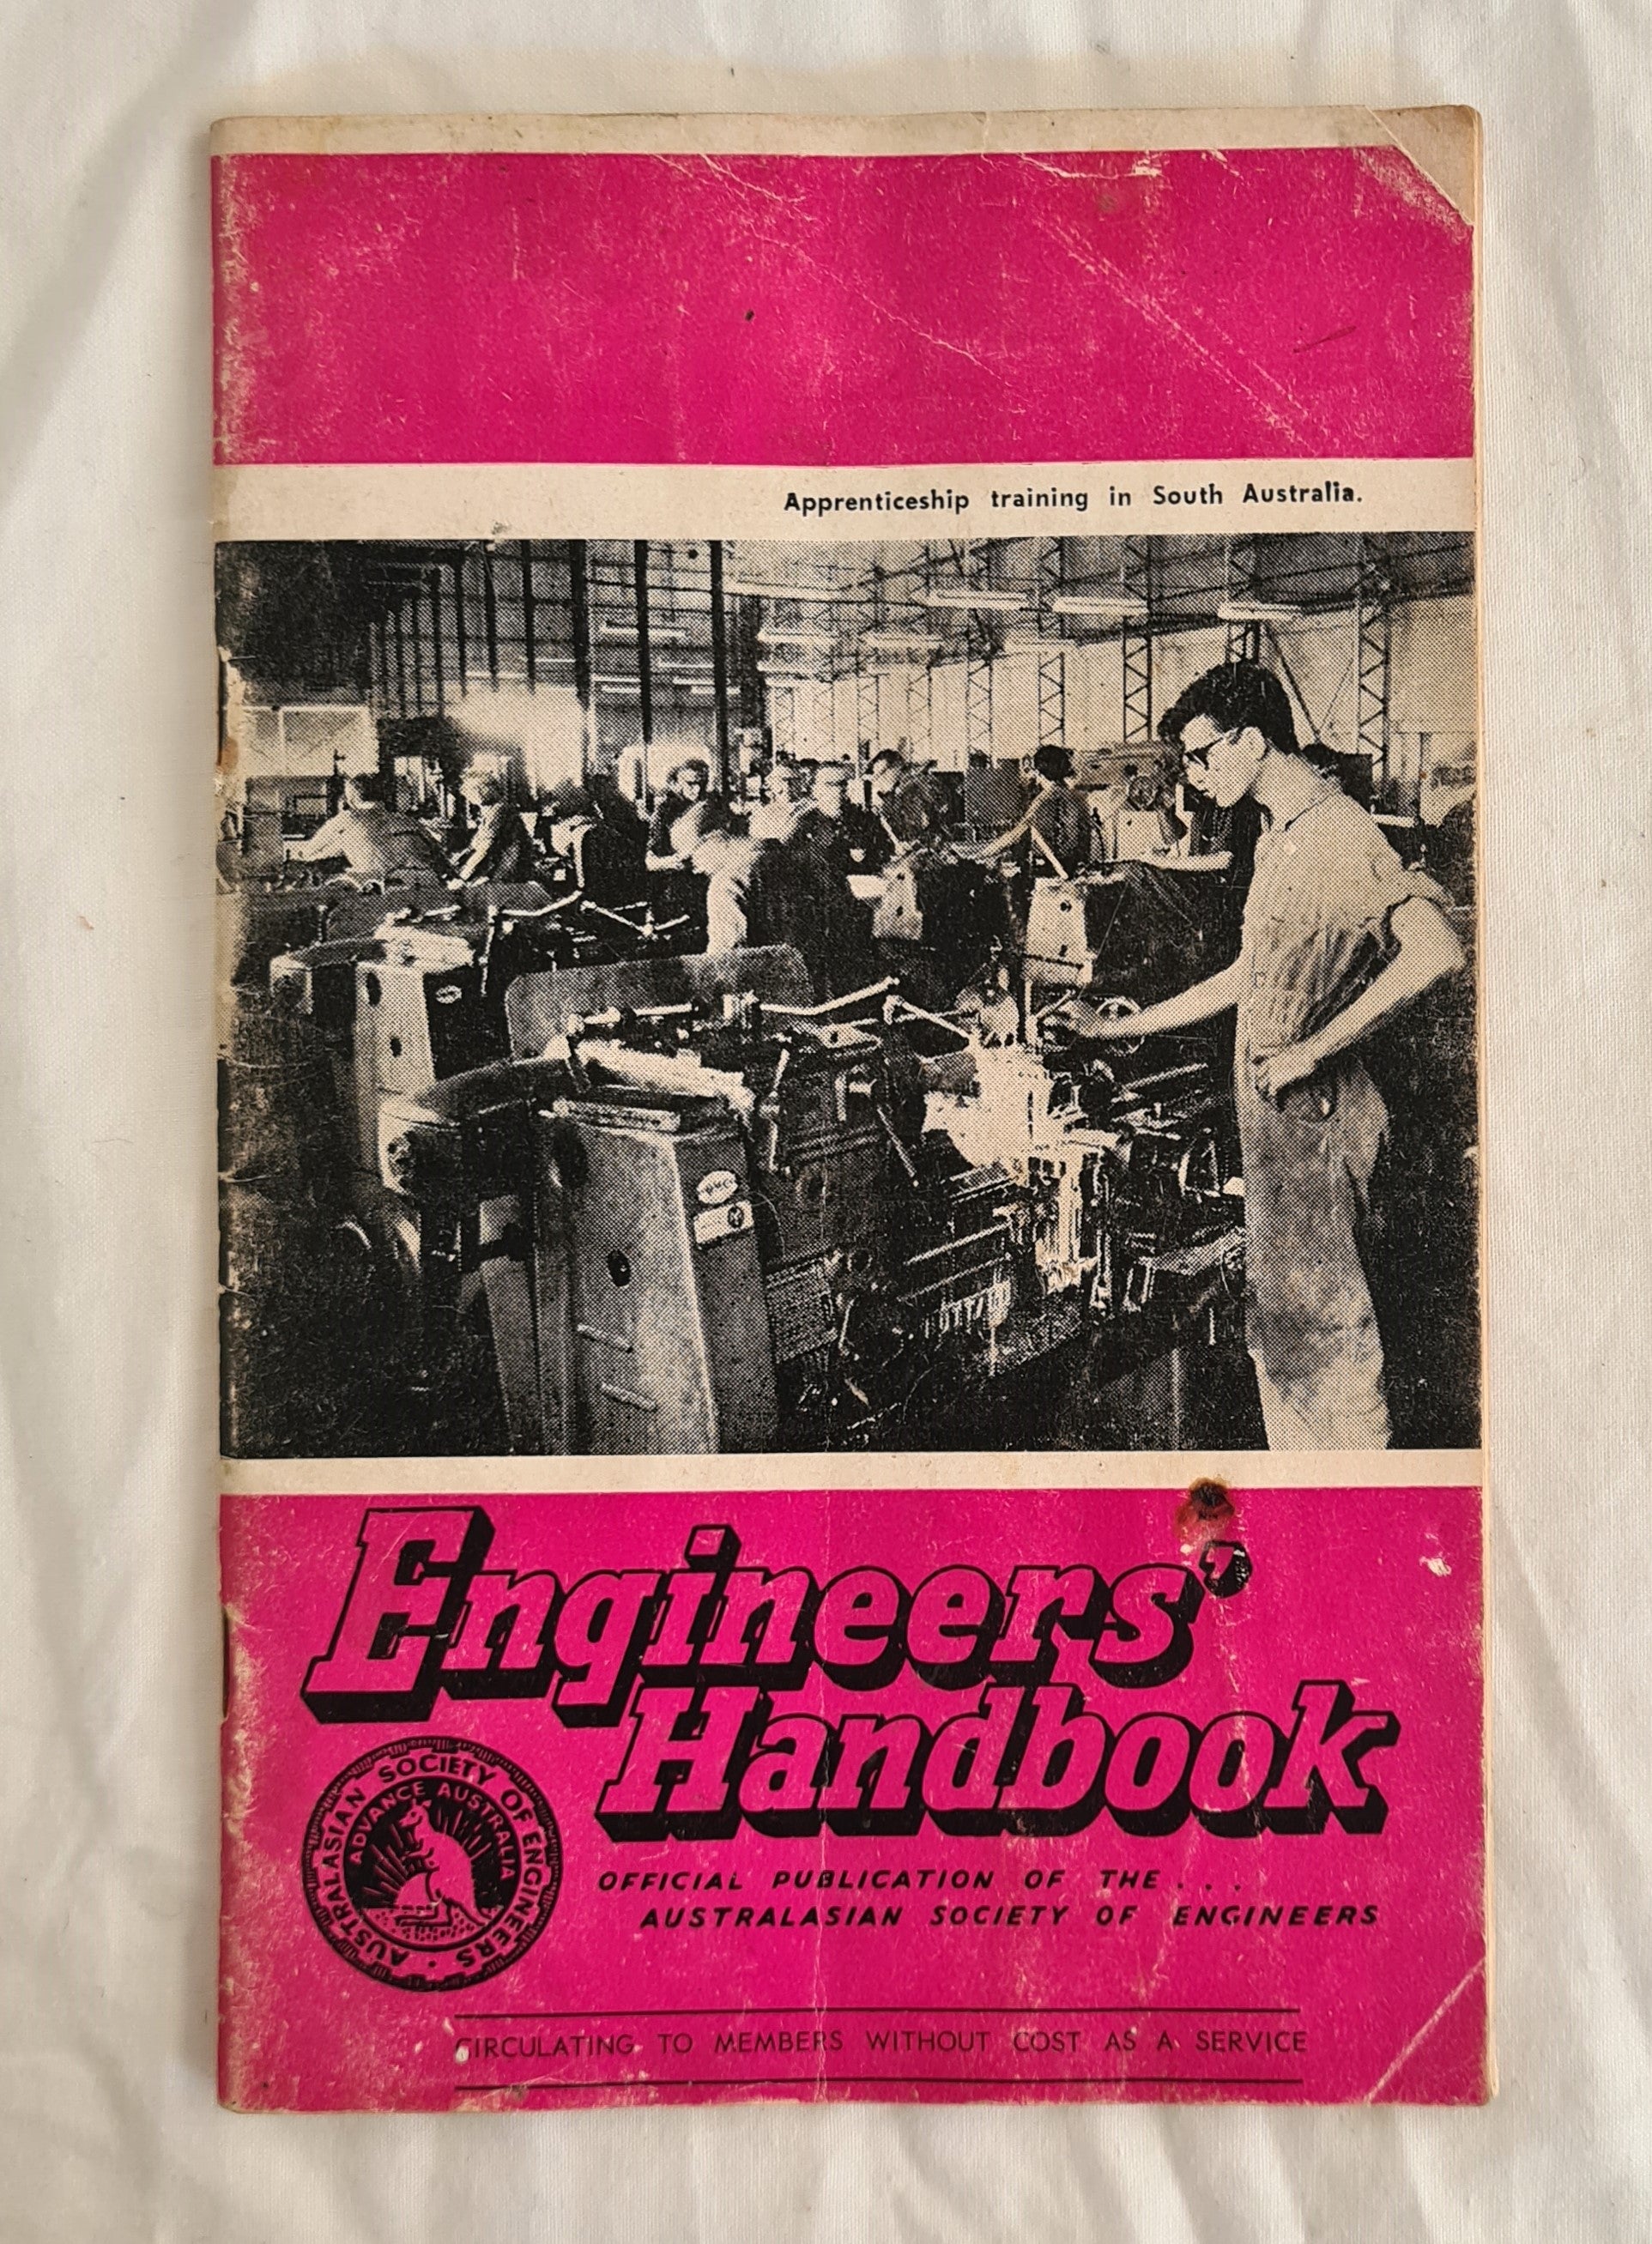 Engineers’ Handbook Official Publication of the Australasian Society of Engineers